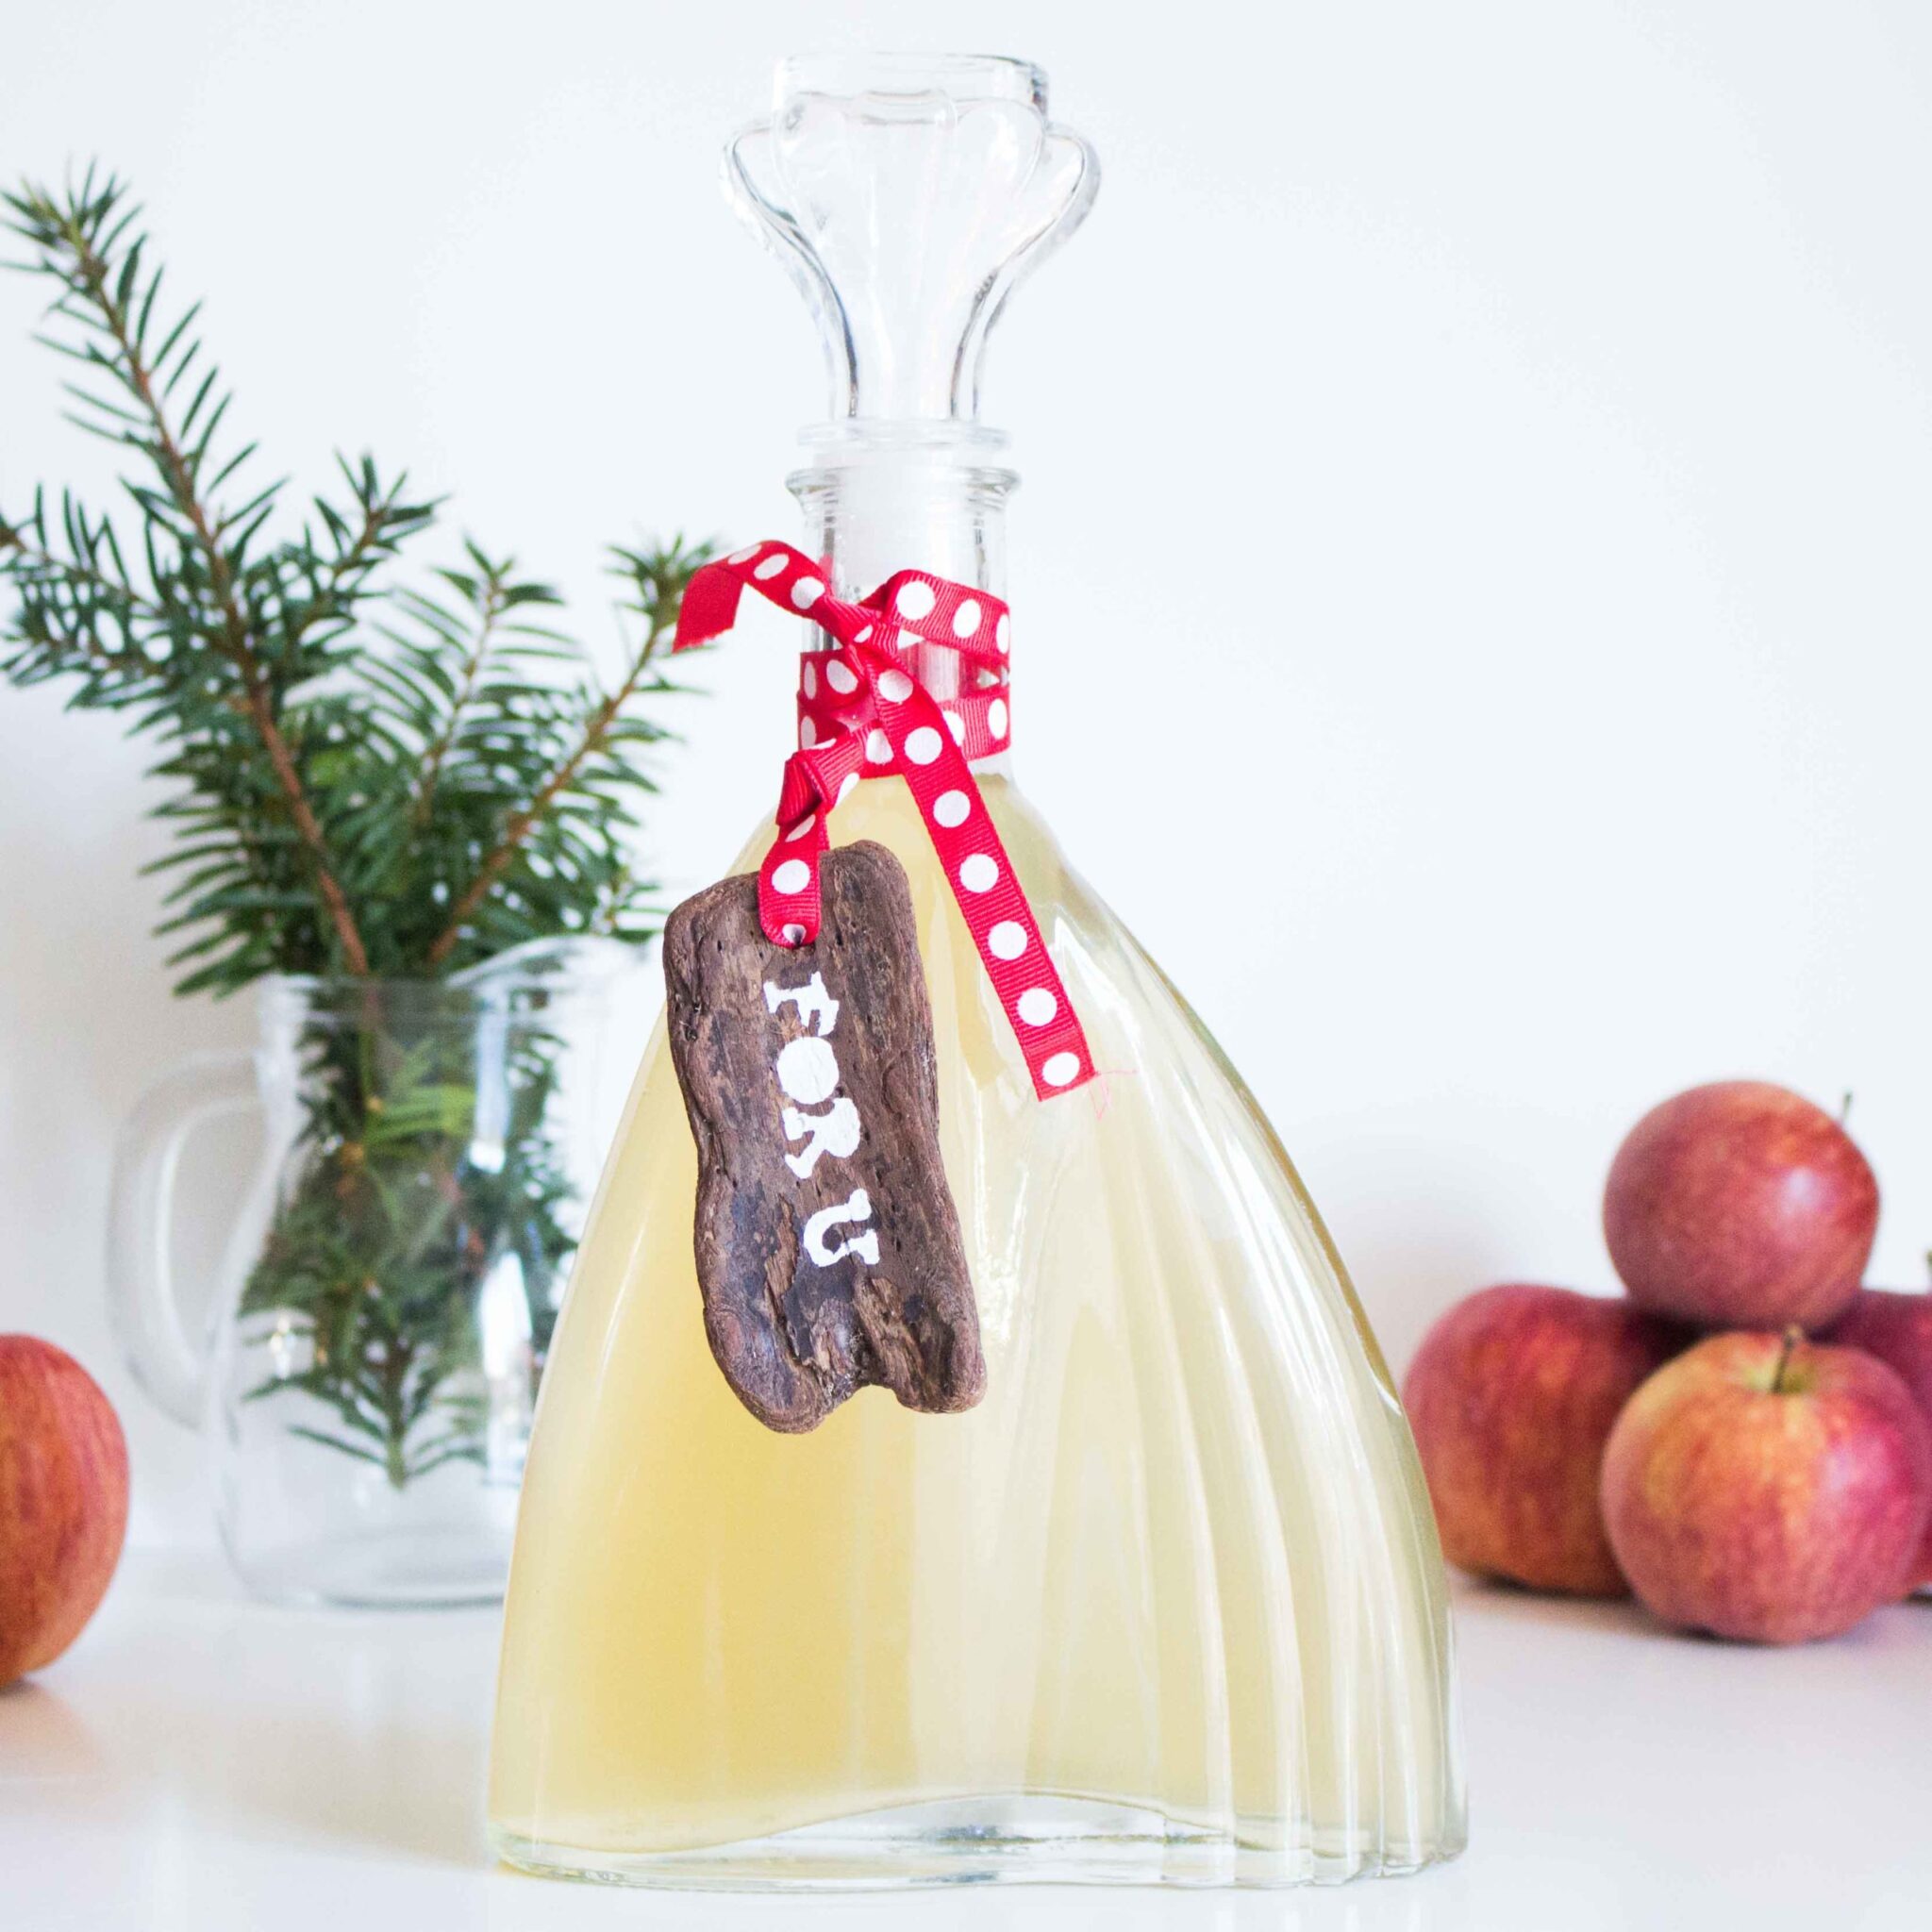 Homemade apple cider vinegar. A healthy and unique gift idea for the foodie in your life SustainMyCraftHabit 6610 3 scaled